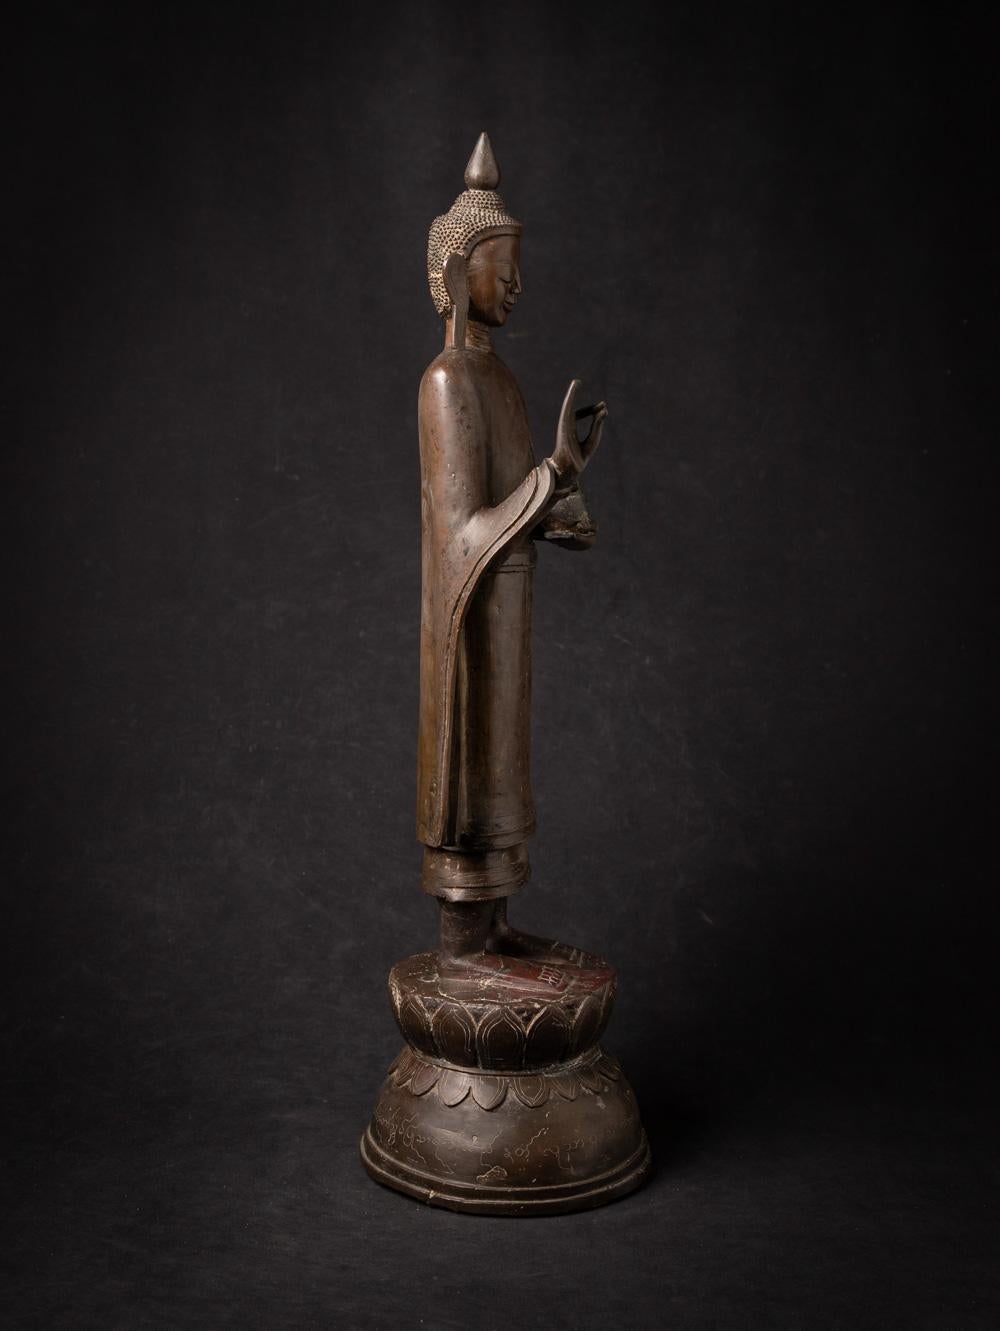 Special antique bronze Burmese Shan Buddha
Material : bronze
62 cm high
18,6 cm wide and 18,3 cm deep
Shan (Tai Yai) style
Vitarka mudra
18th century
With inscriptions in the base, probably the family name of the donor of the Buddha
Exceptional high